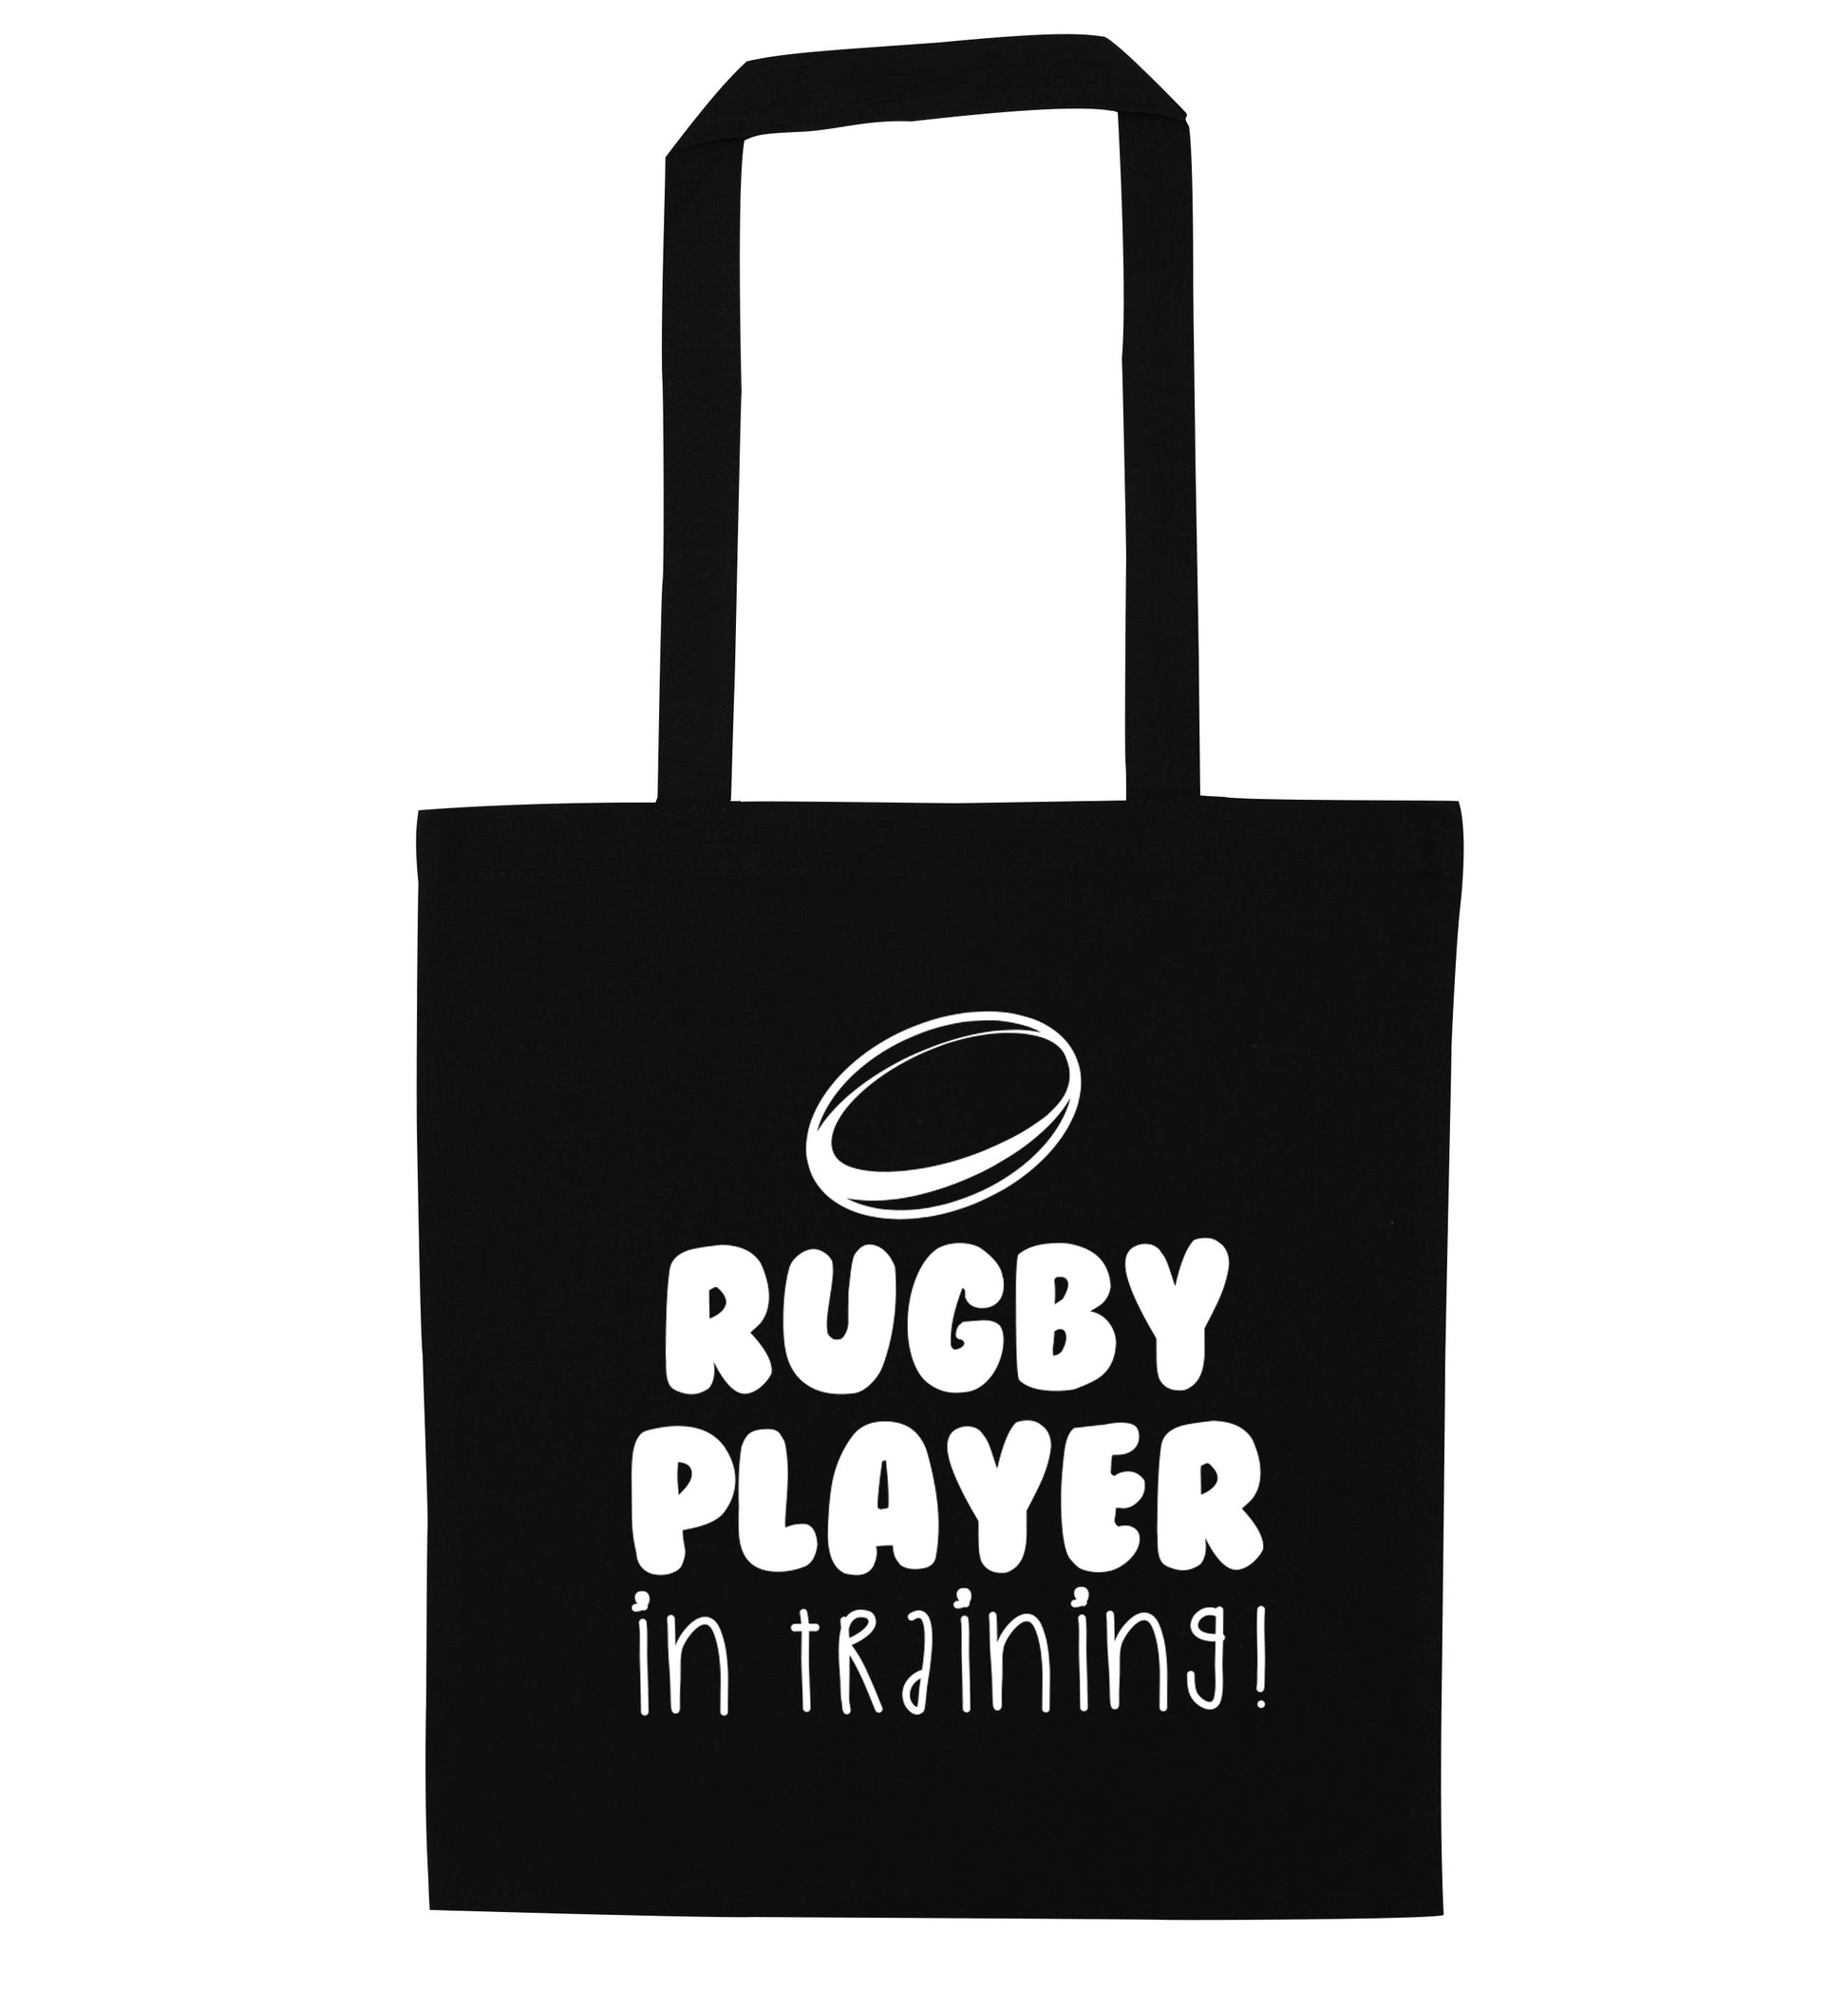 Rugby player in training black tote bag